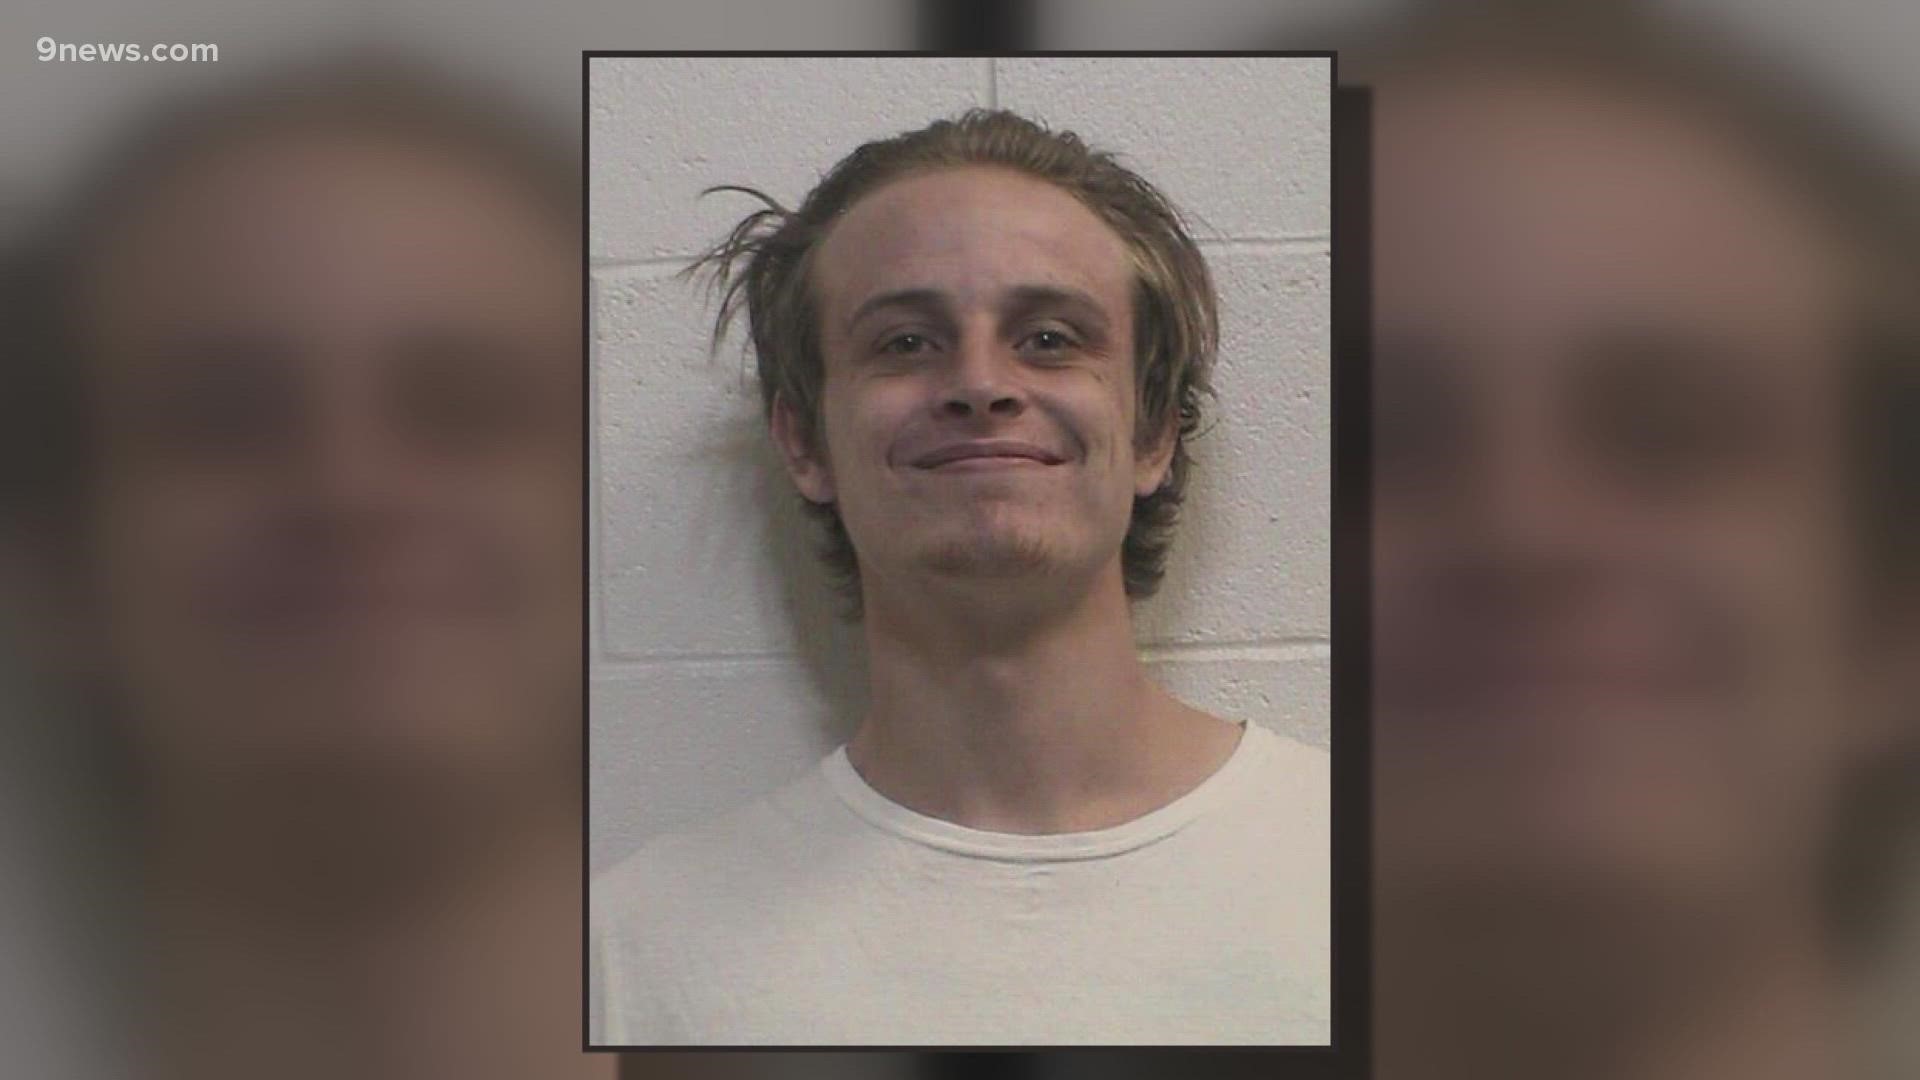 Elias Buck, 22, escaped from the La Plata County Jail because of a problem area that someone escaped from before.